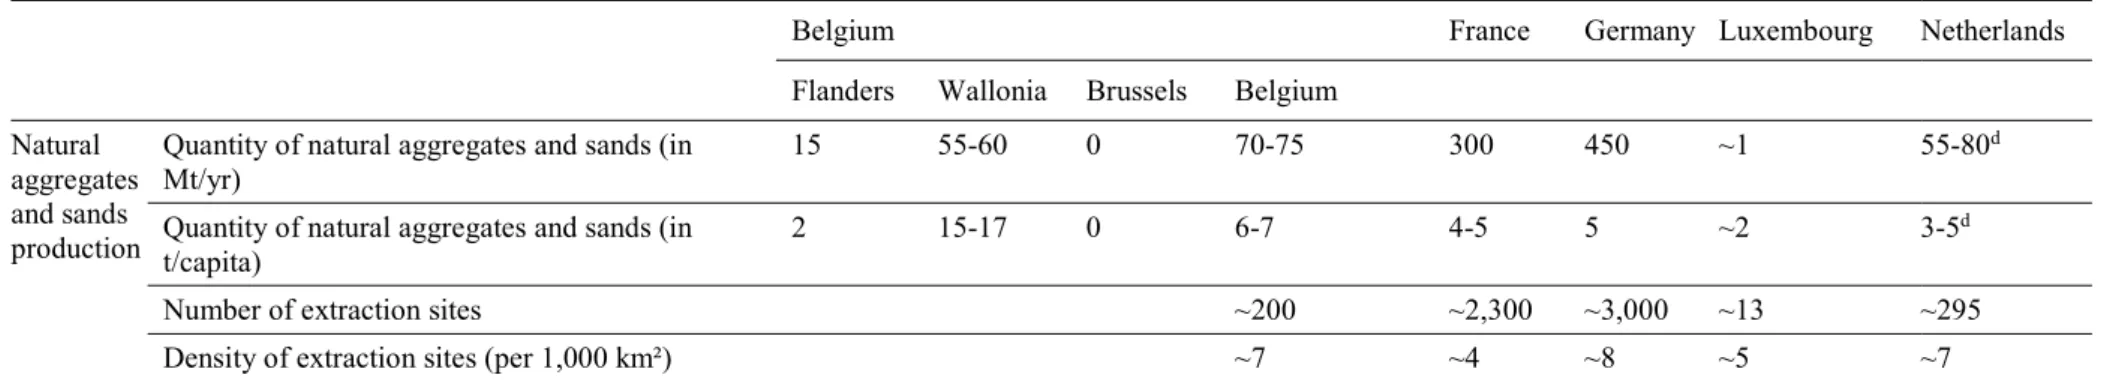 Table 2 (continued). Quantitative data on the market of recycled and natural sands and aggregates in NW European countries